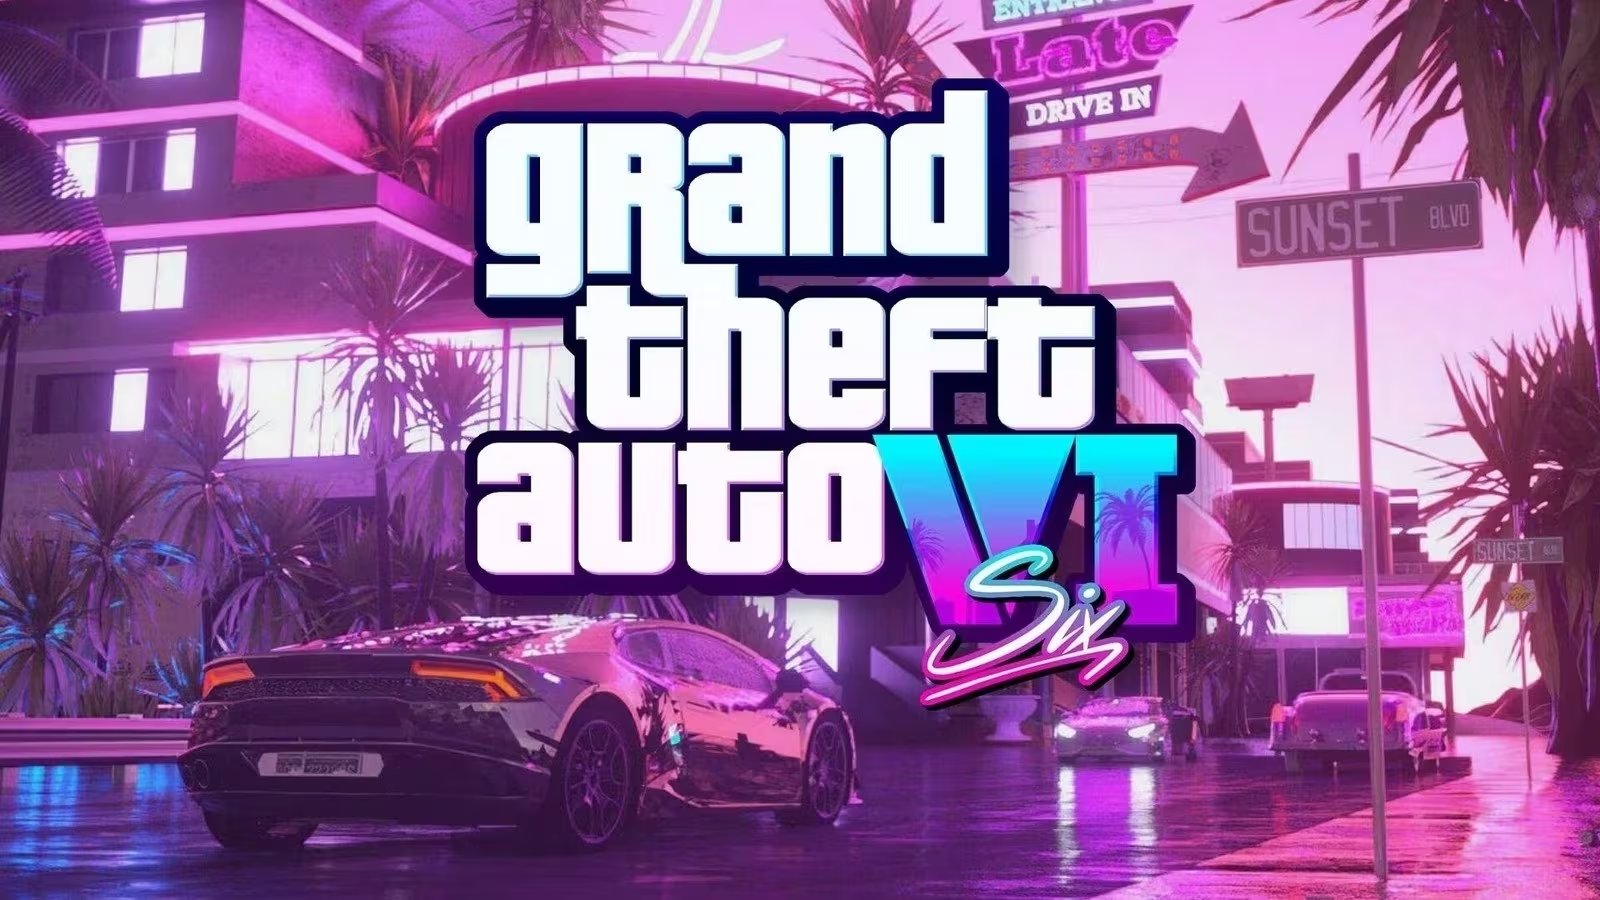 Grand Theft Auto VI, Image Credits given to Gaming Detective on 𝕏 / @that1detectiv3